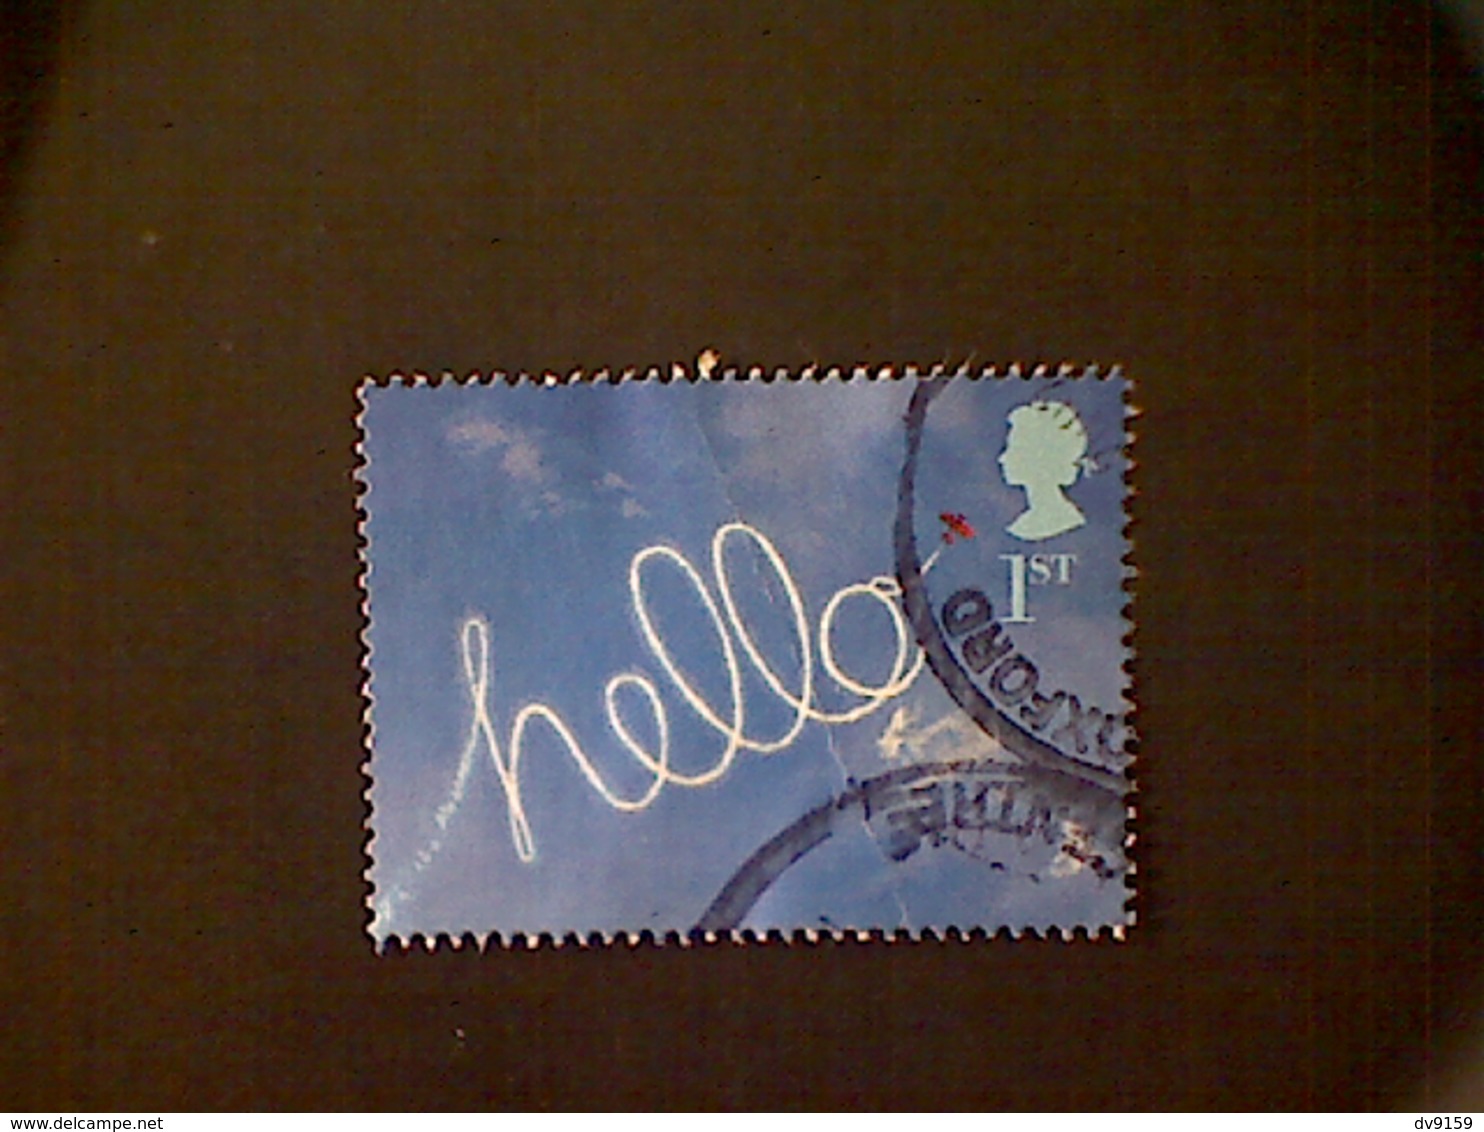 Great Britain, Scott #2025, Used (o), 2003, Greetings Stamp: Hello, 1st, Multicolored - Used Stamps